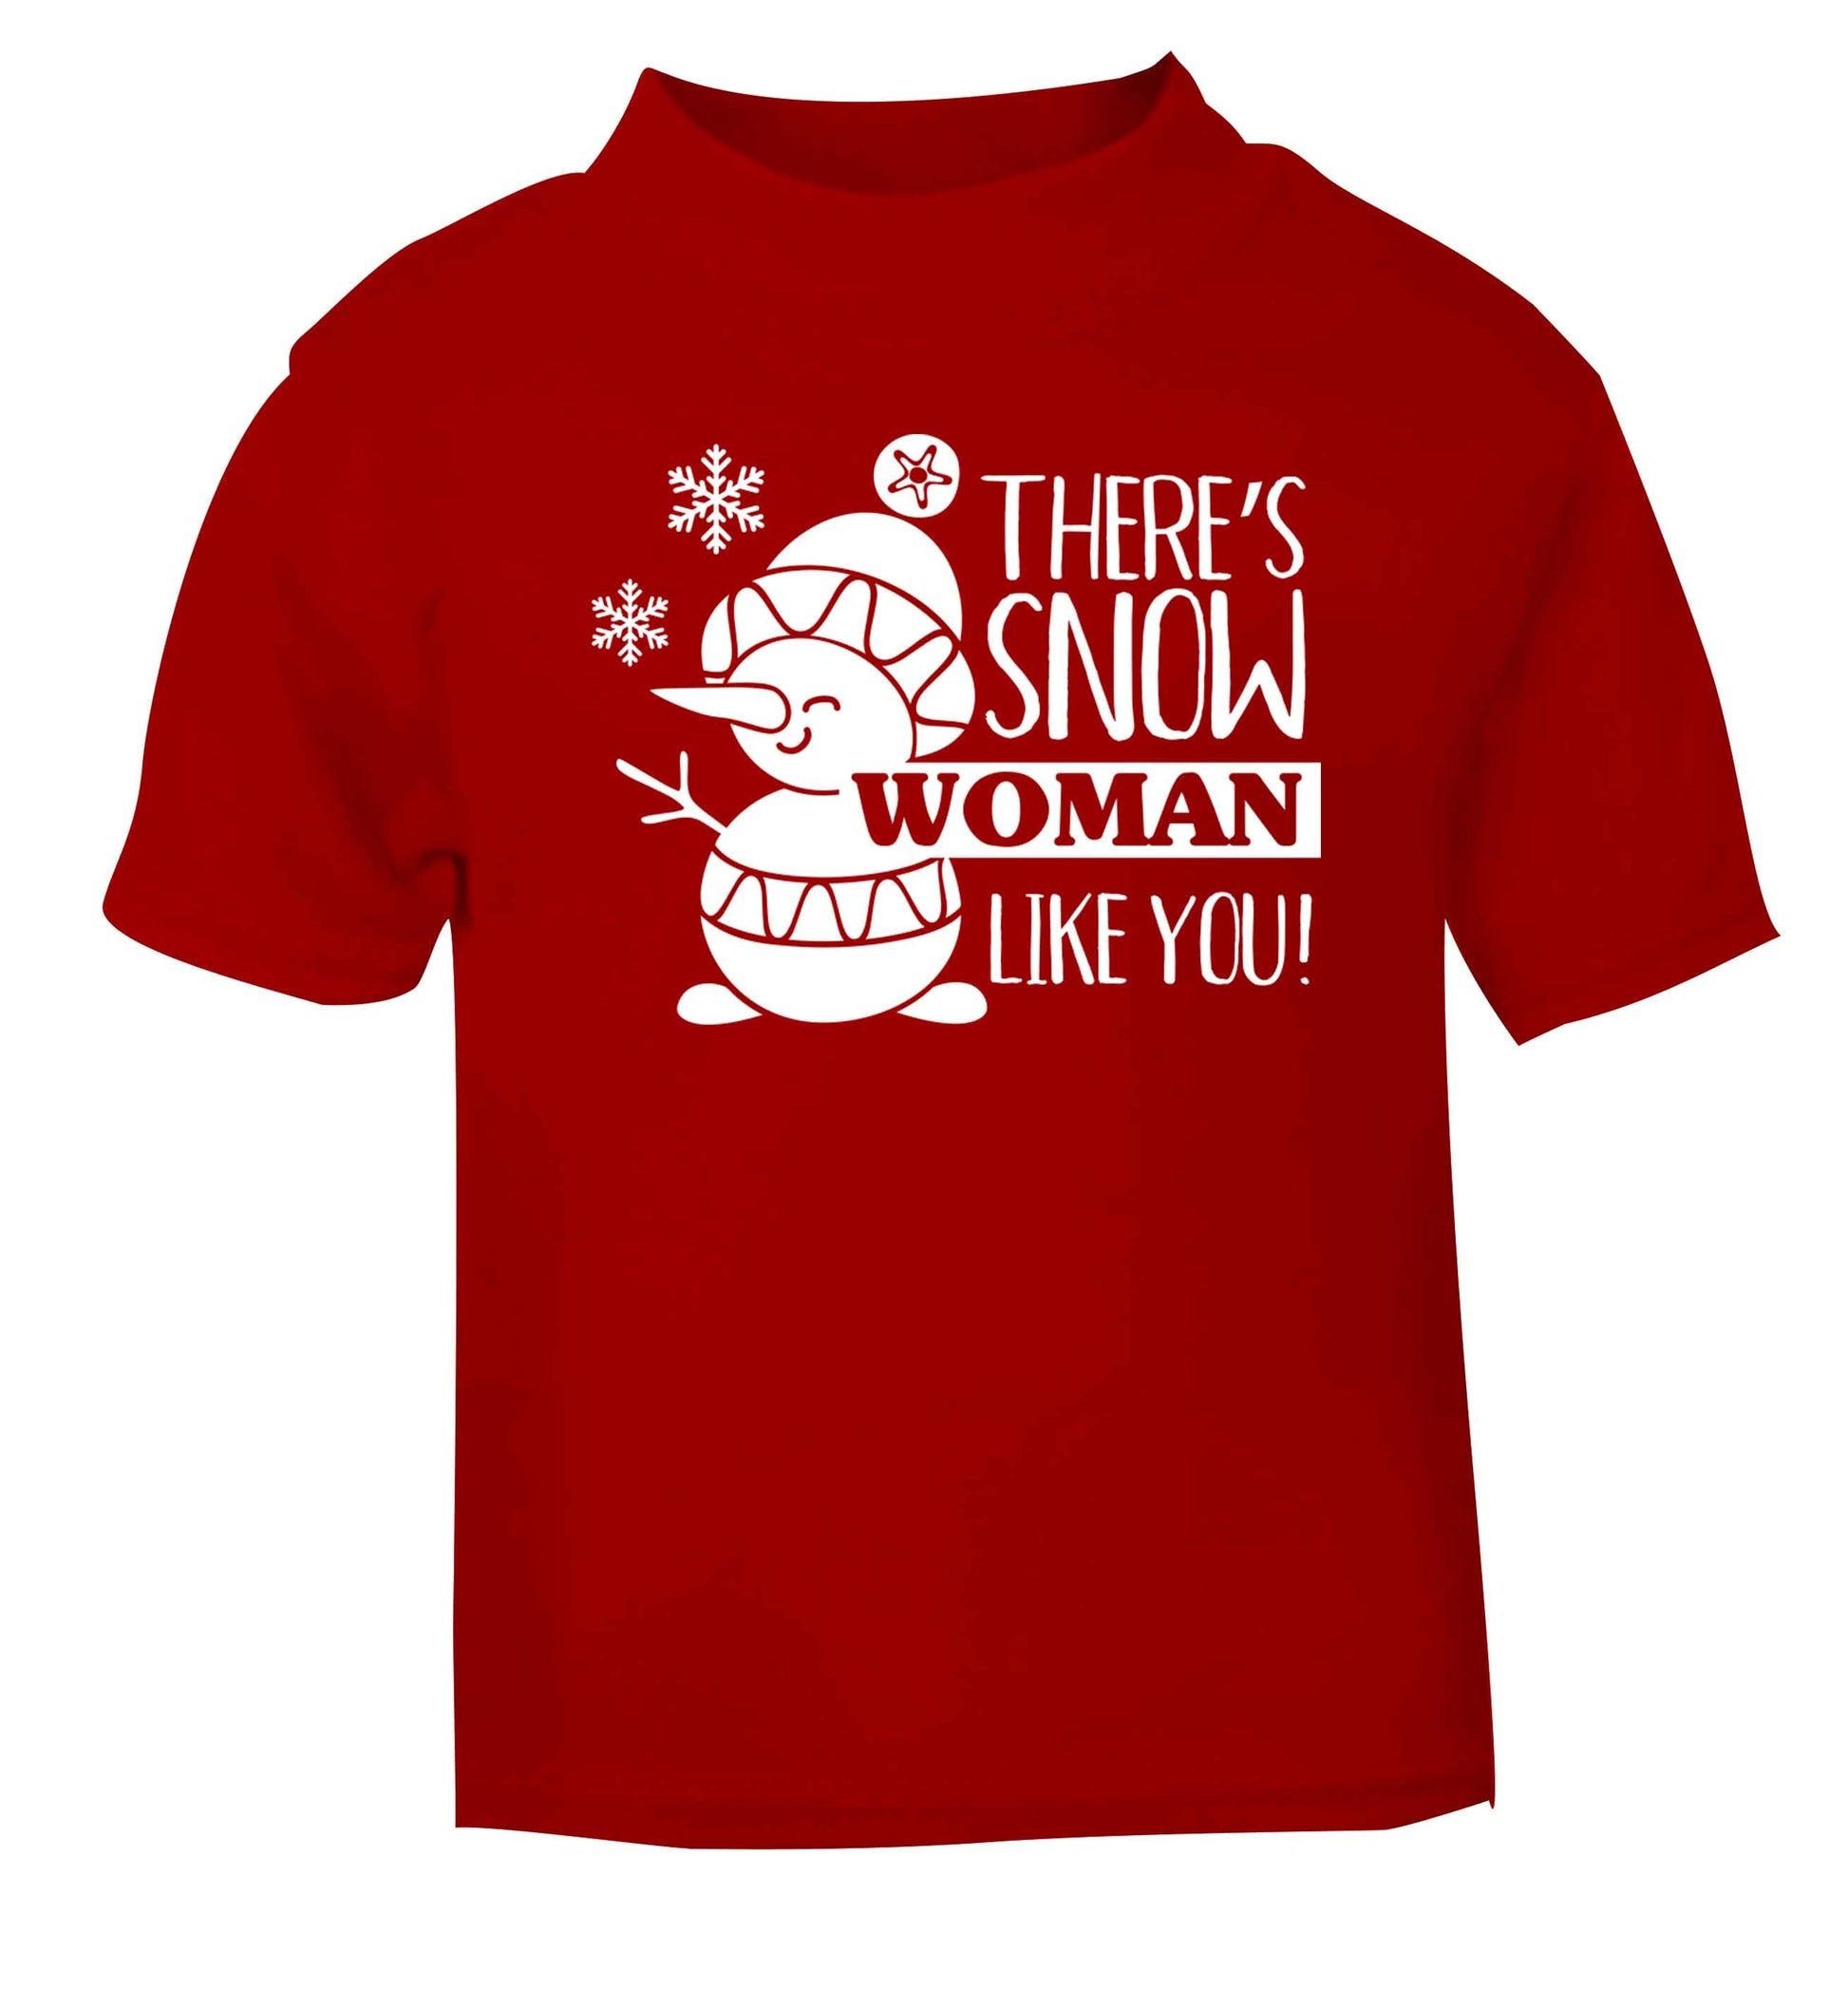 There's snow woman like you red baby toddler Tshirt 2 Years